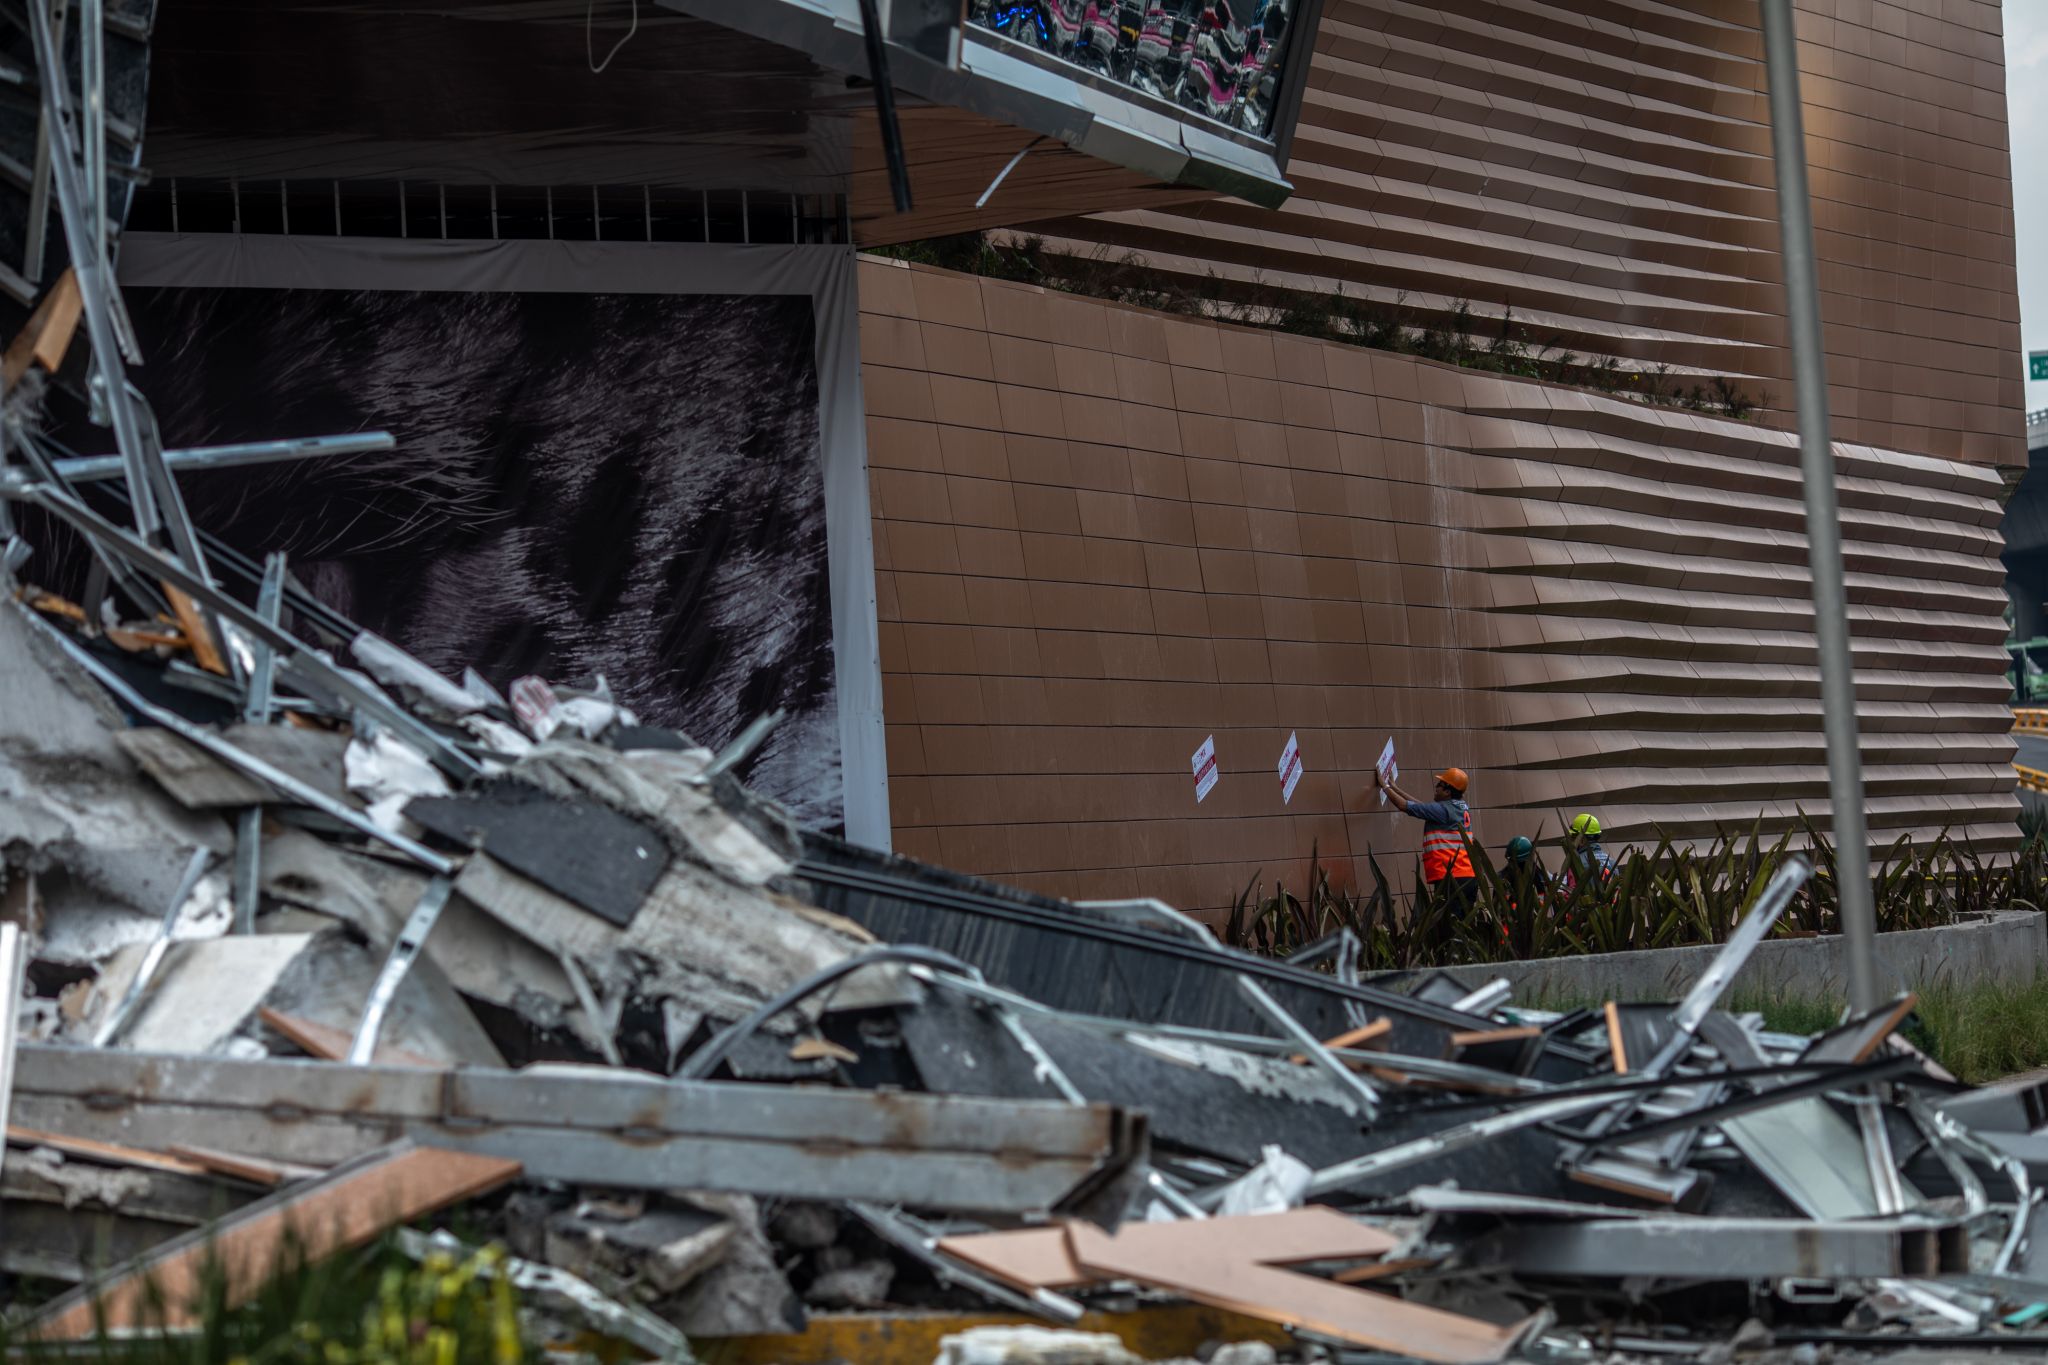 Shocking video shows Mexico City shopping mall collapse